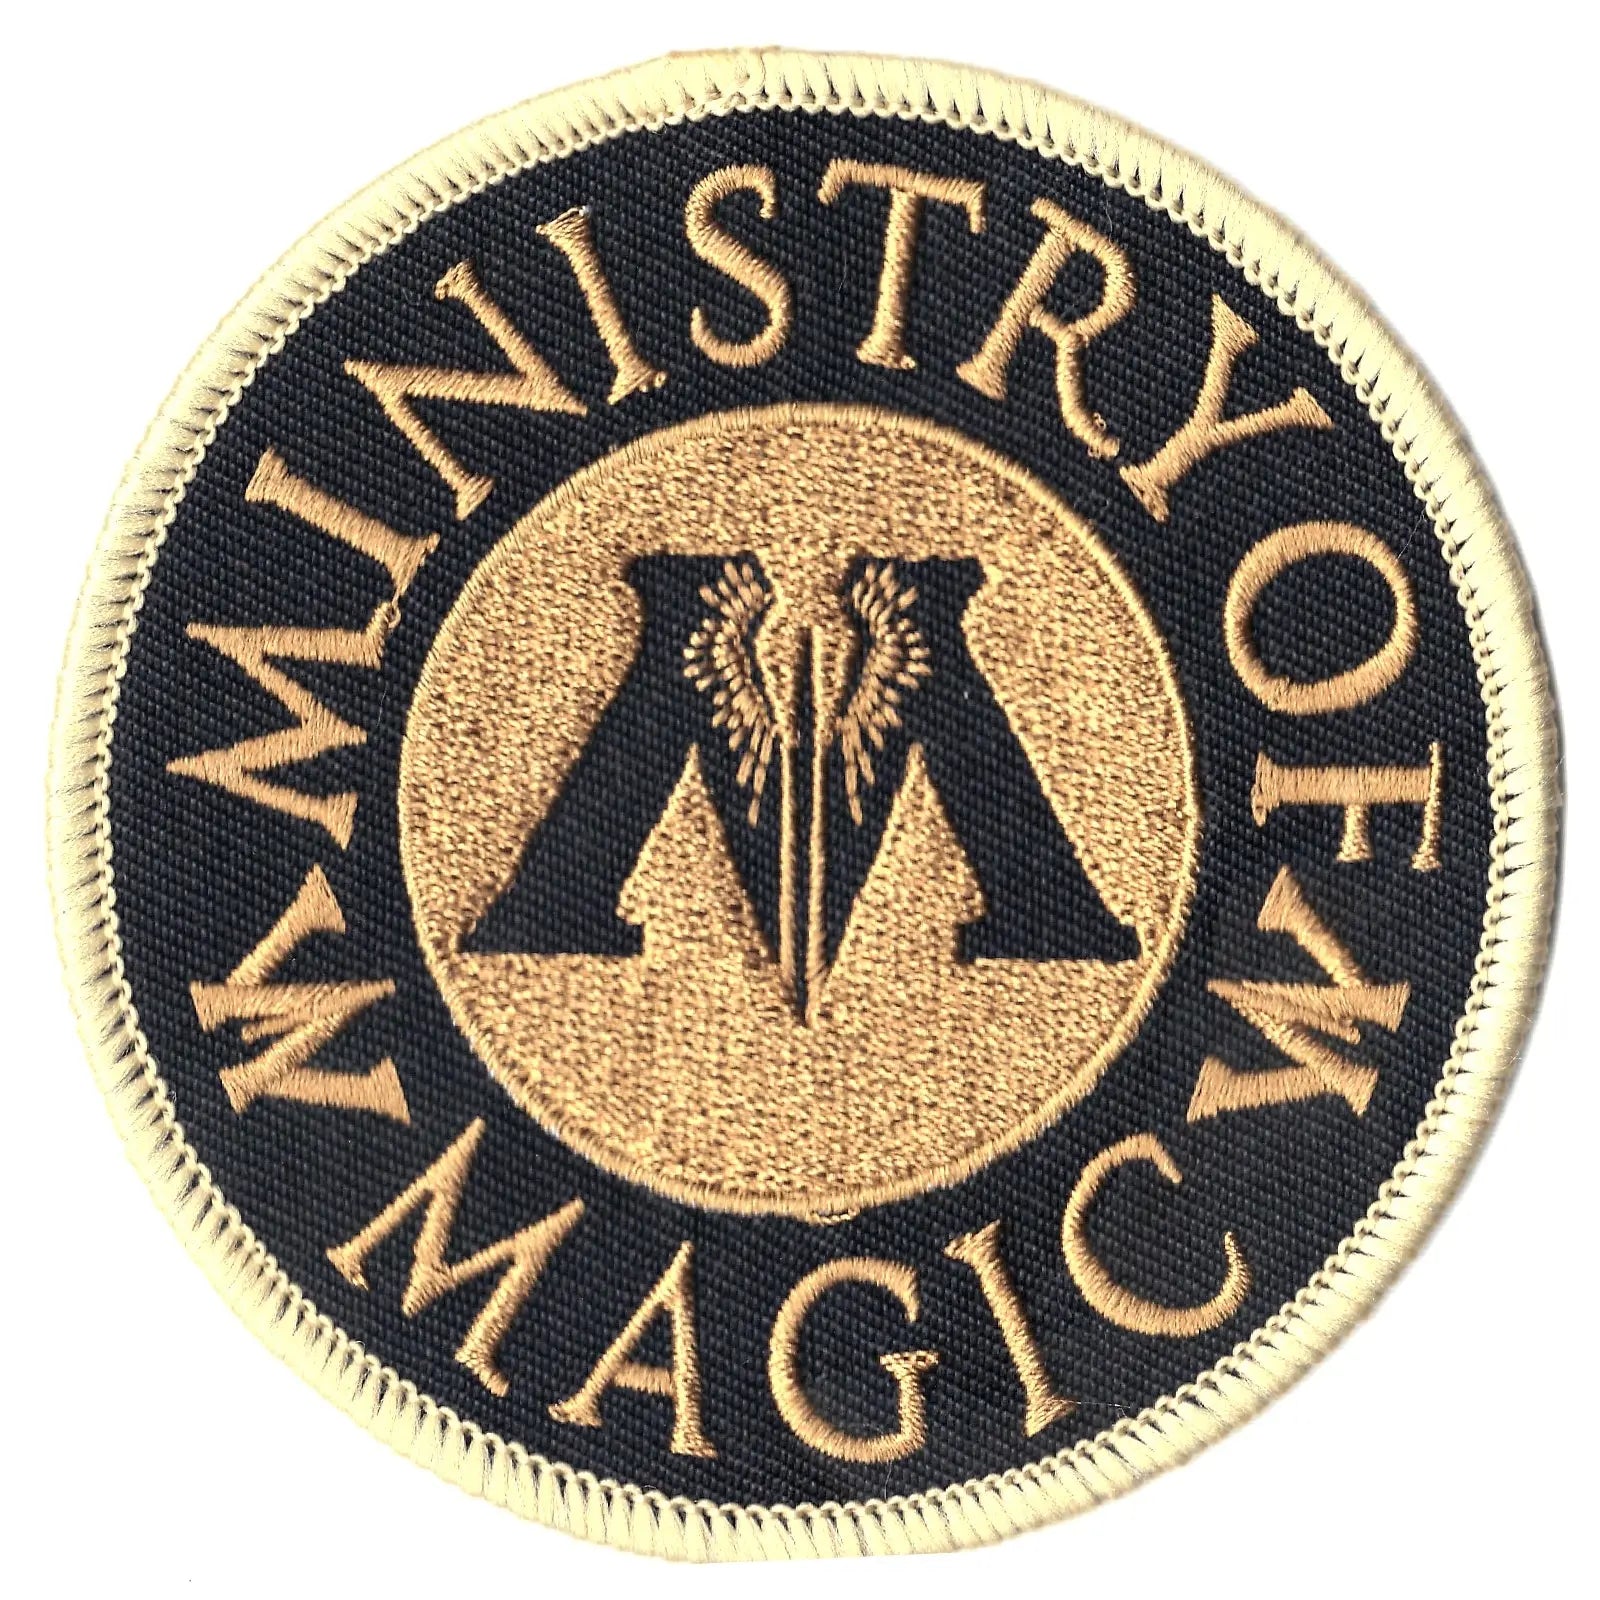 Harry Potter Ministry of Magic Patch 